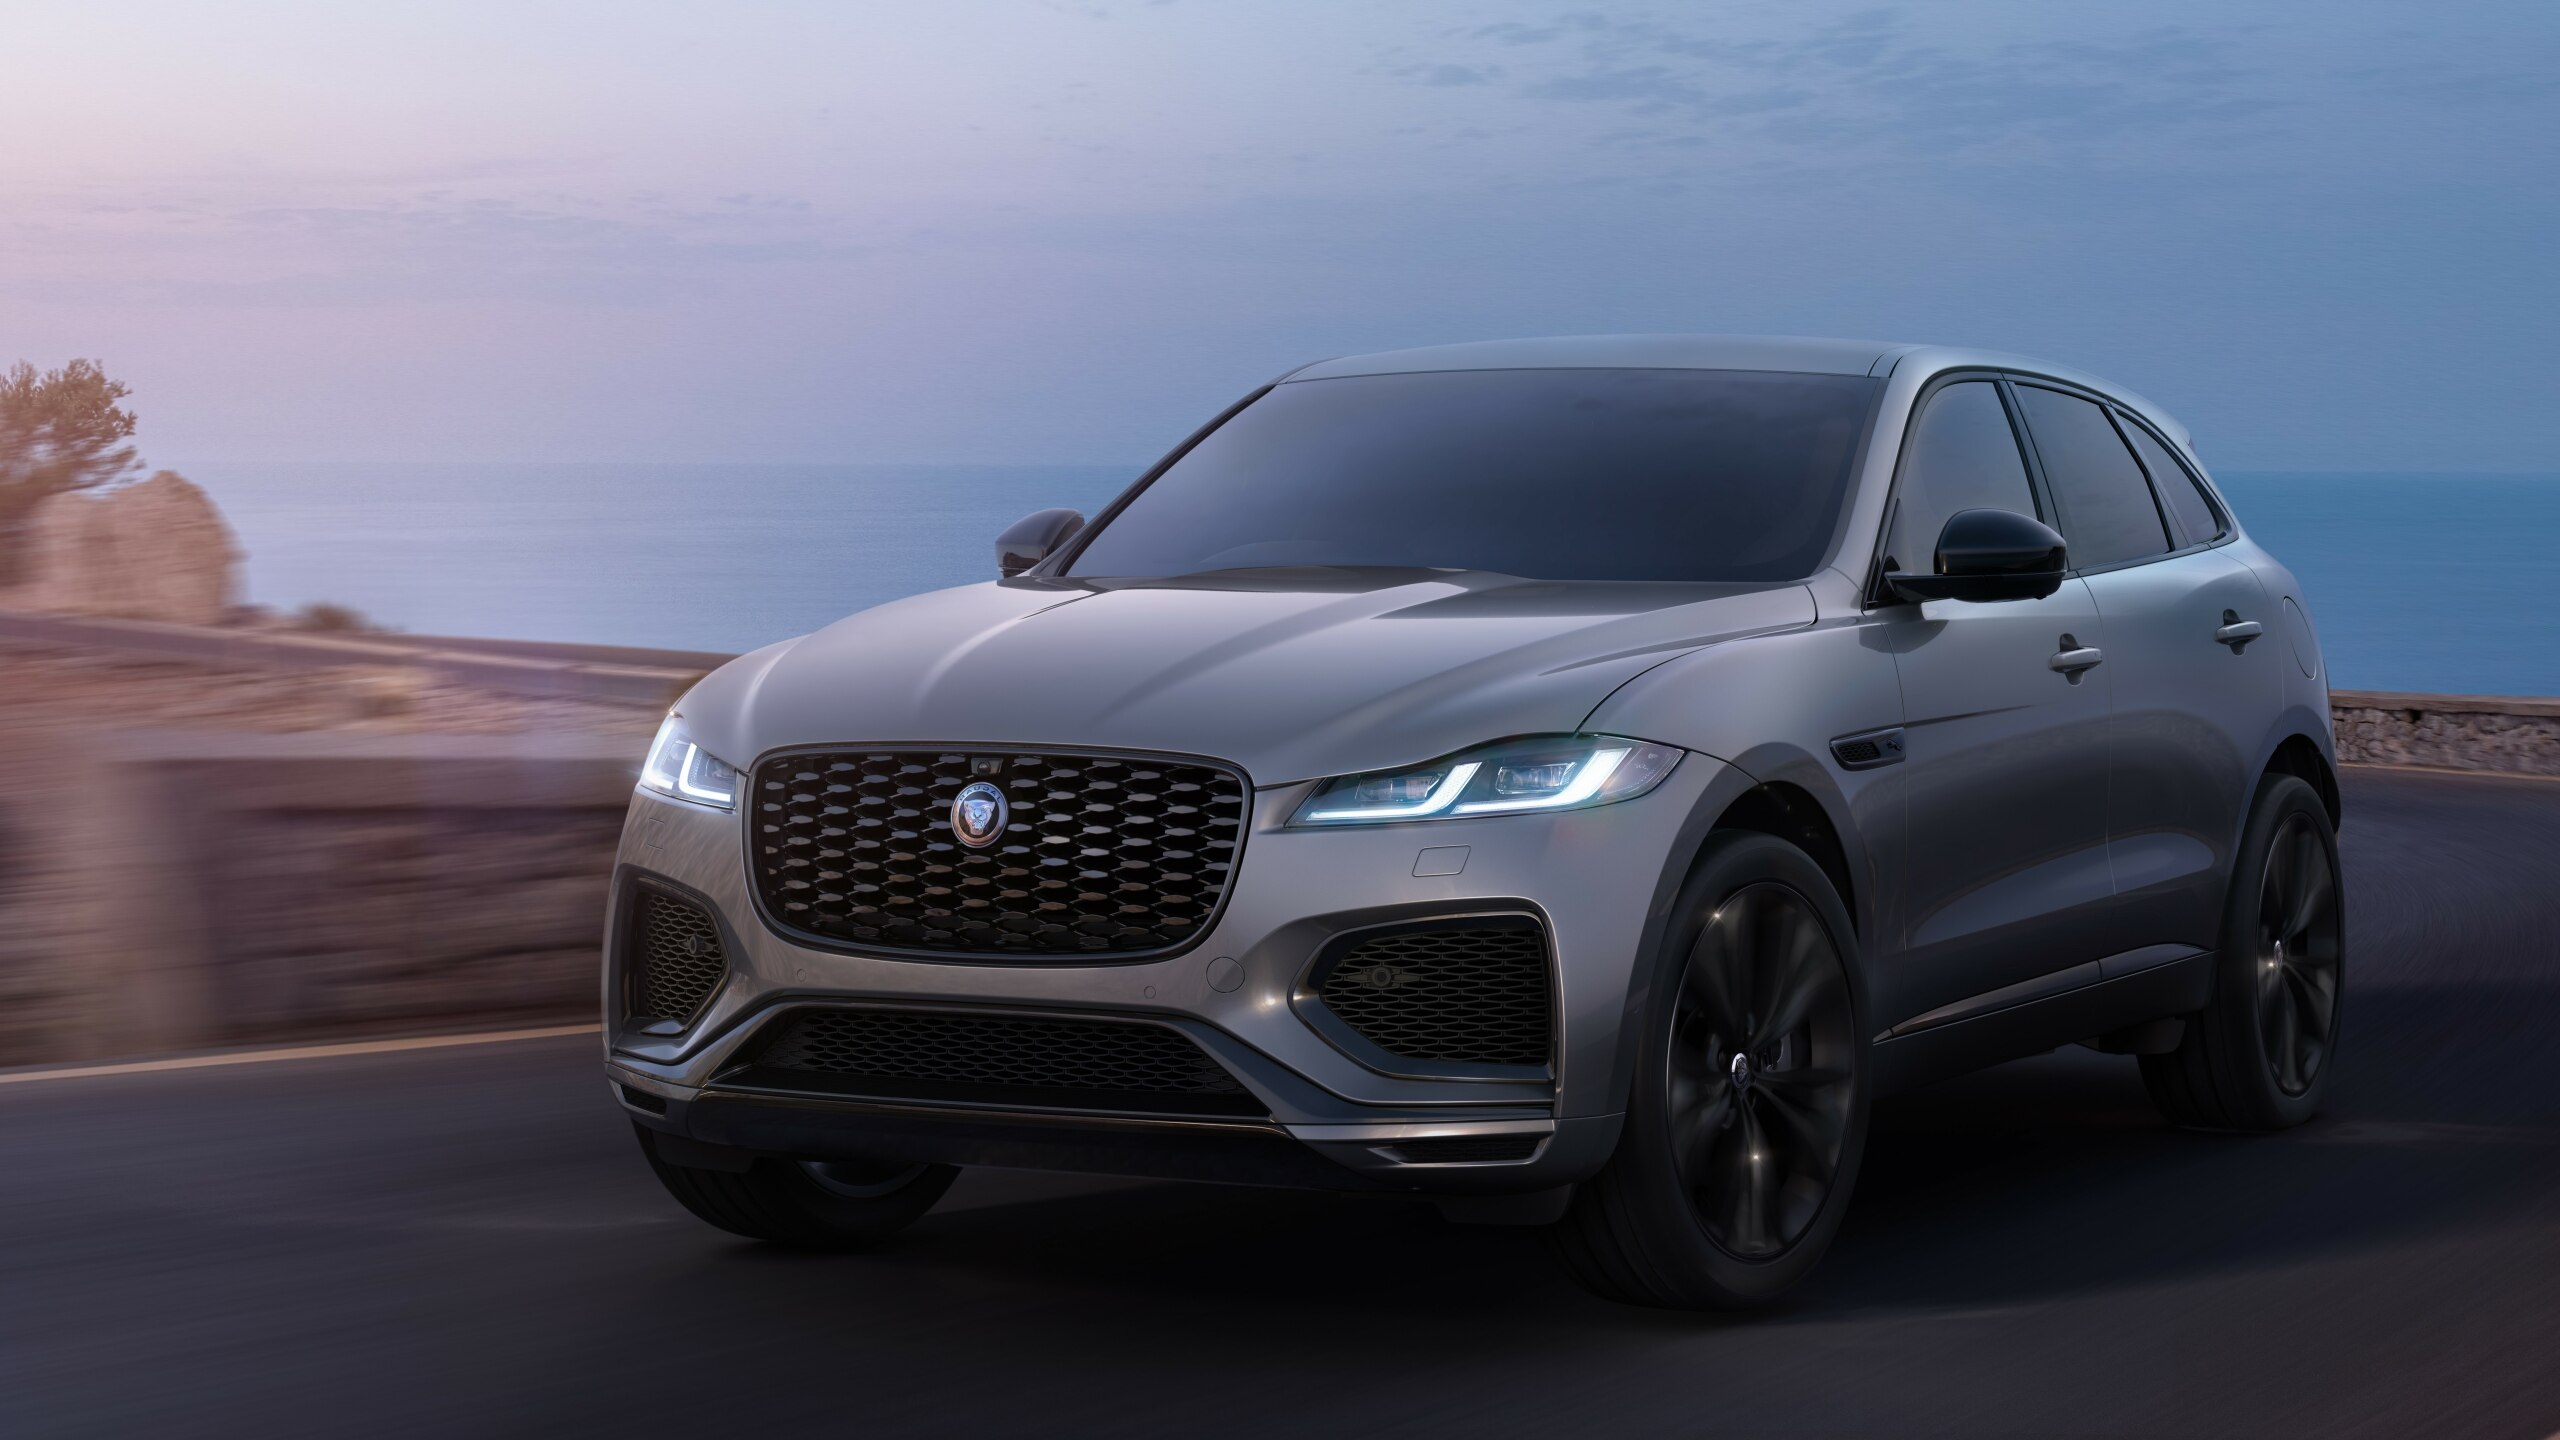 A 2025 Jaguar F-PACE 90th Anniversary Edition In Eiger Grey Exterior Shade